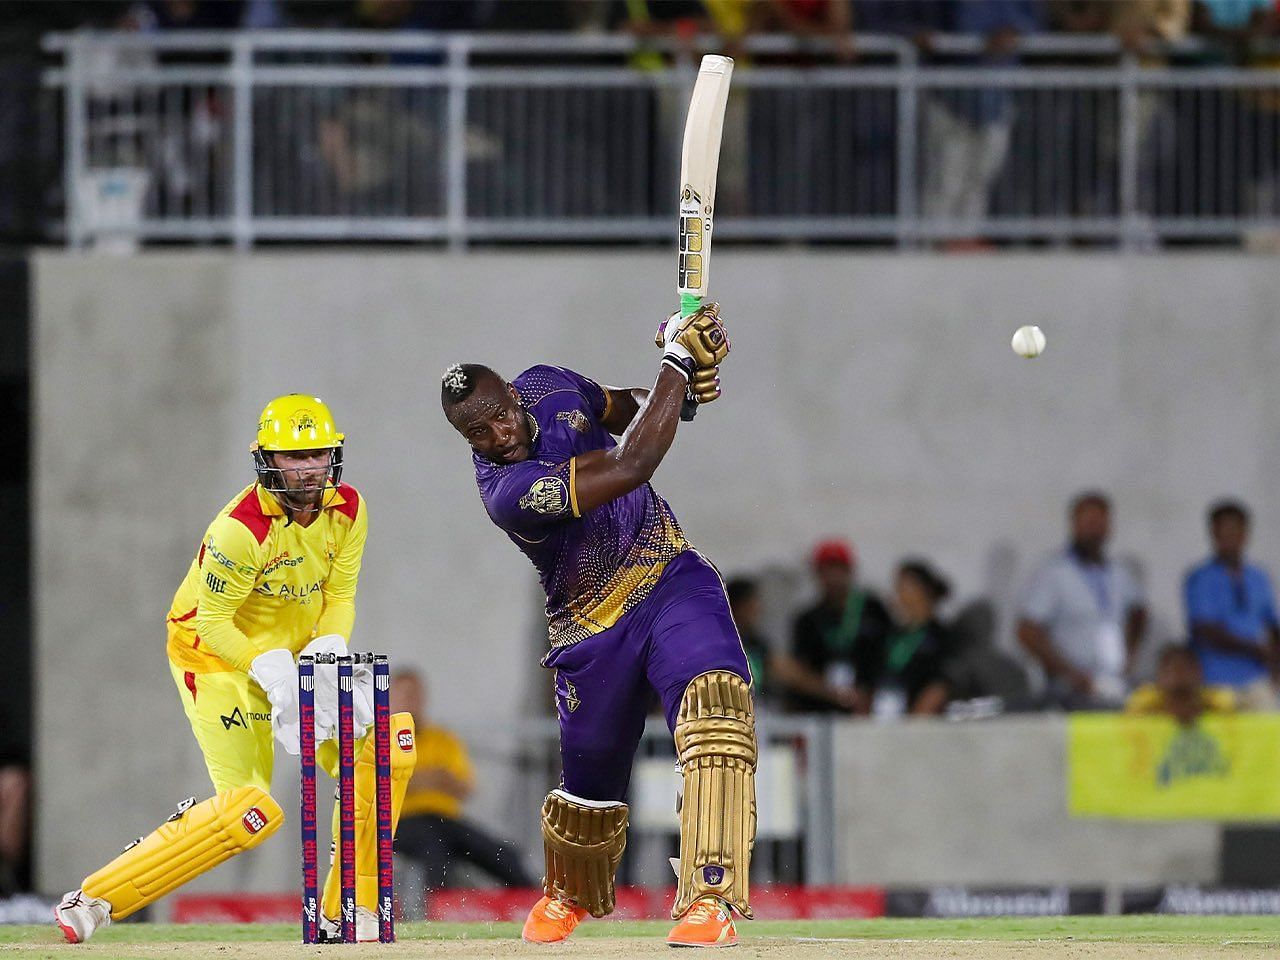 Andre Russell in action (Image Courtesy: Twitter/Los Angeles Knight Riders)